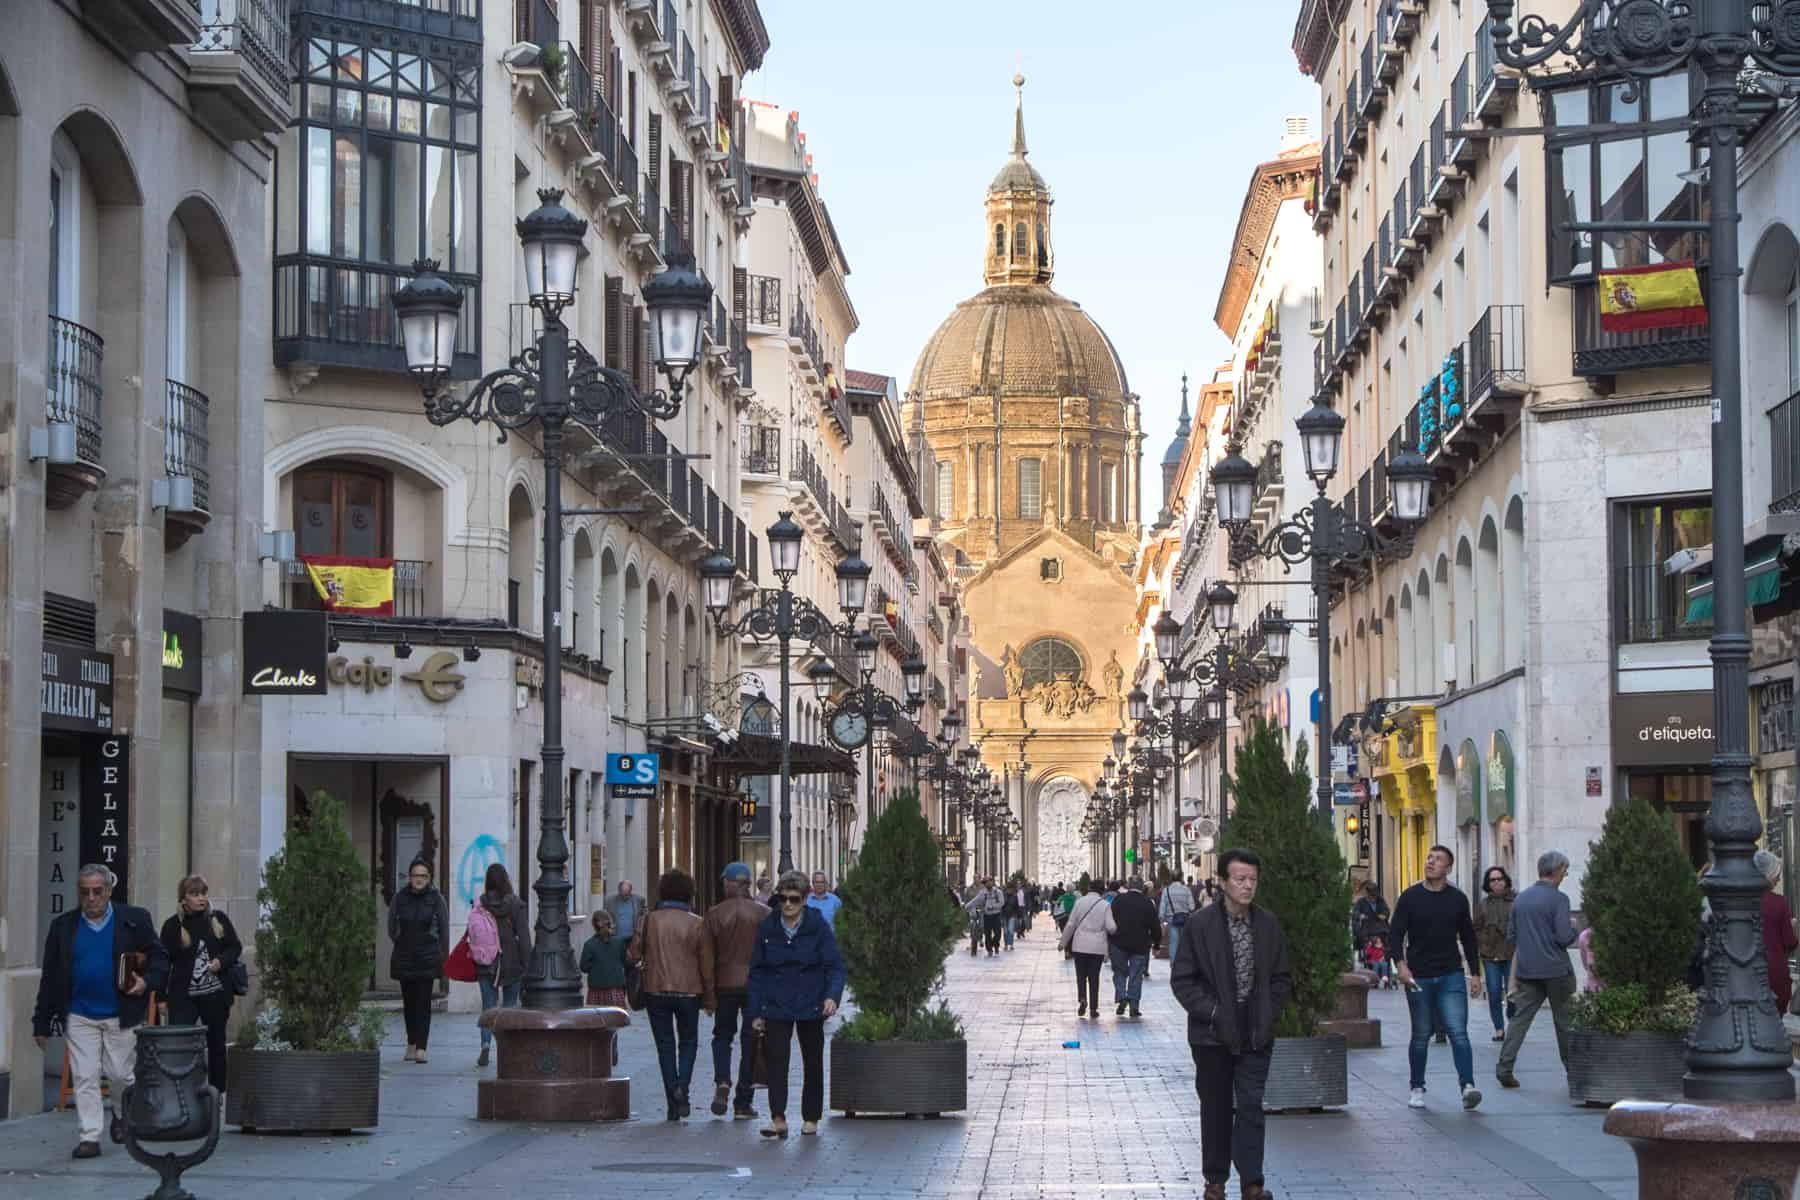 People walk down a street in Zaragoza city lined with white buildings and black lampposts. The street leads towards the golden dome structure. 